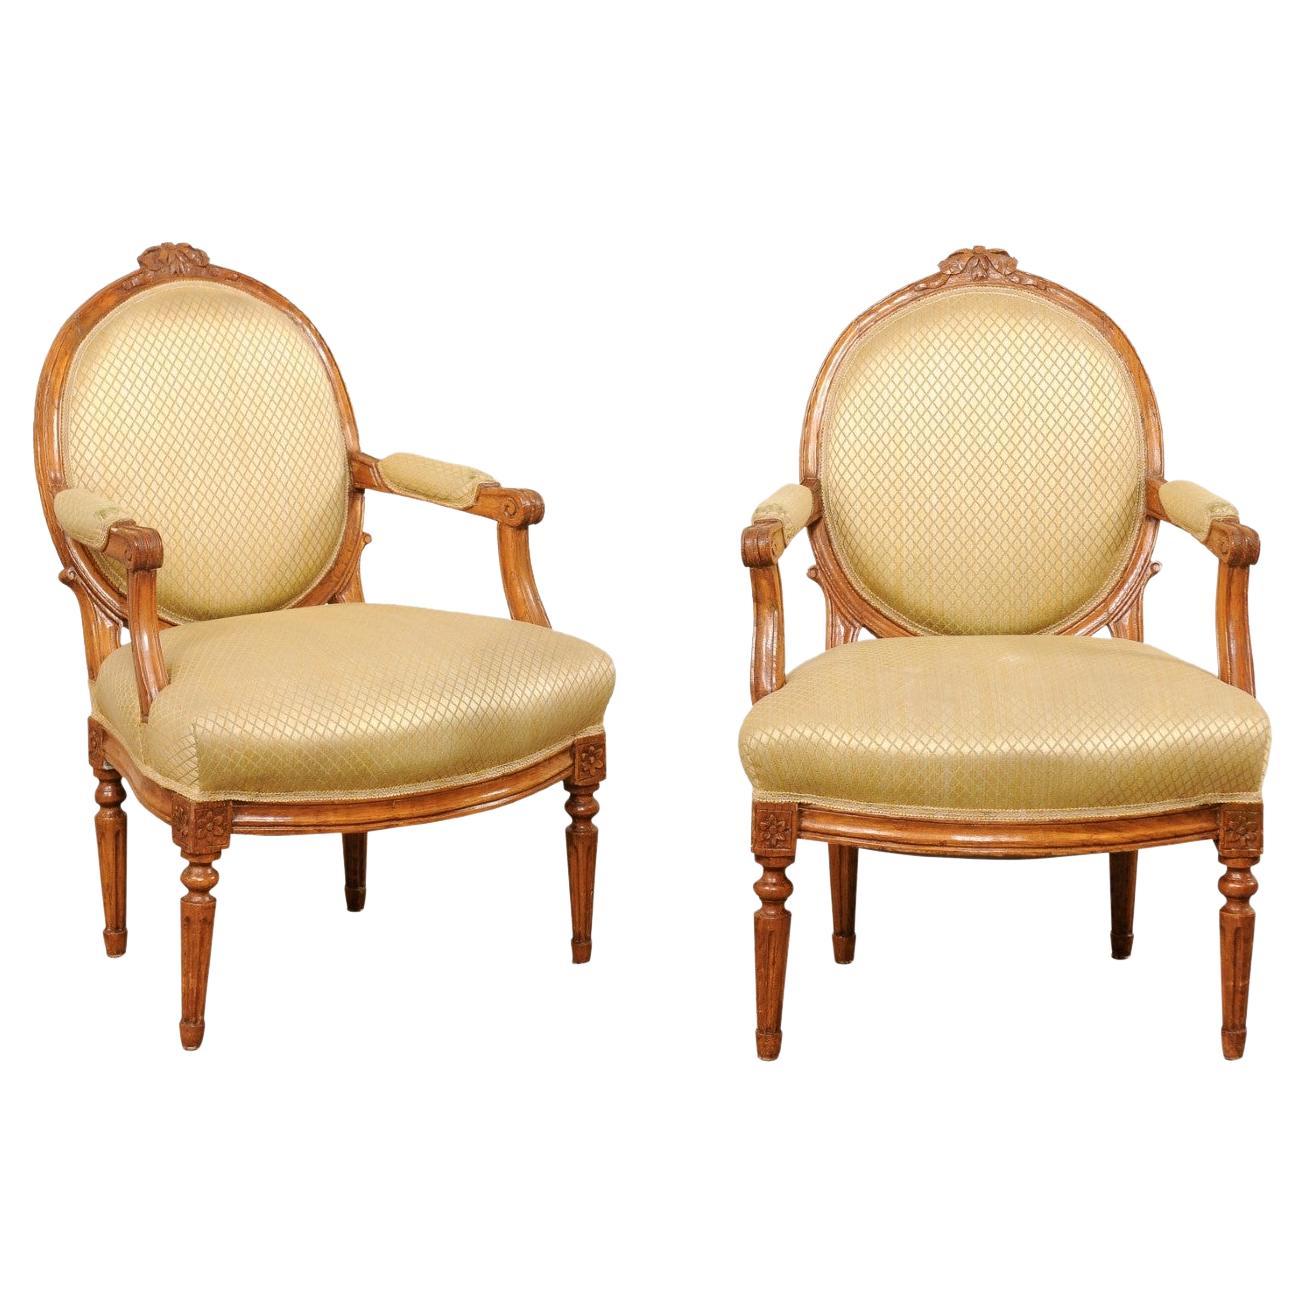 French Pair of Louis XVI Oval-Back Fauteuils For Sale at 1stDibs